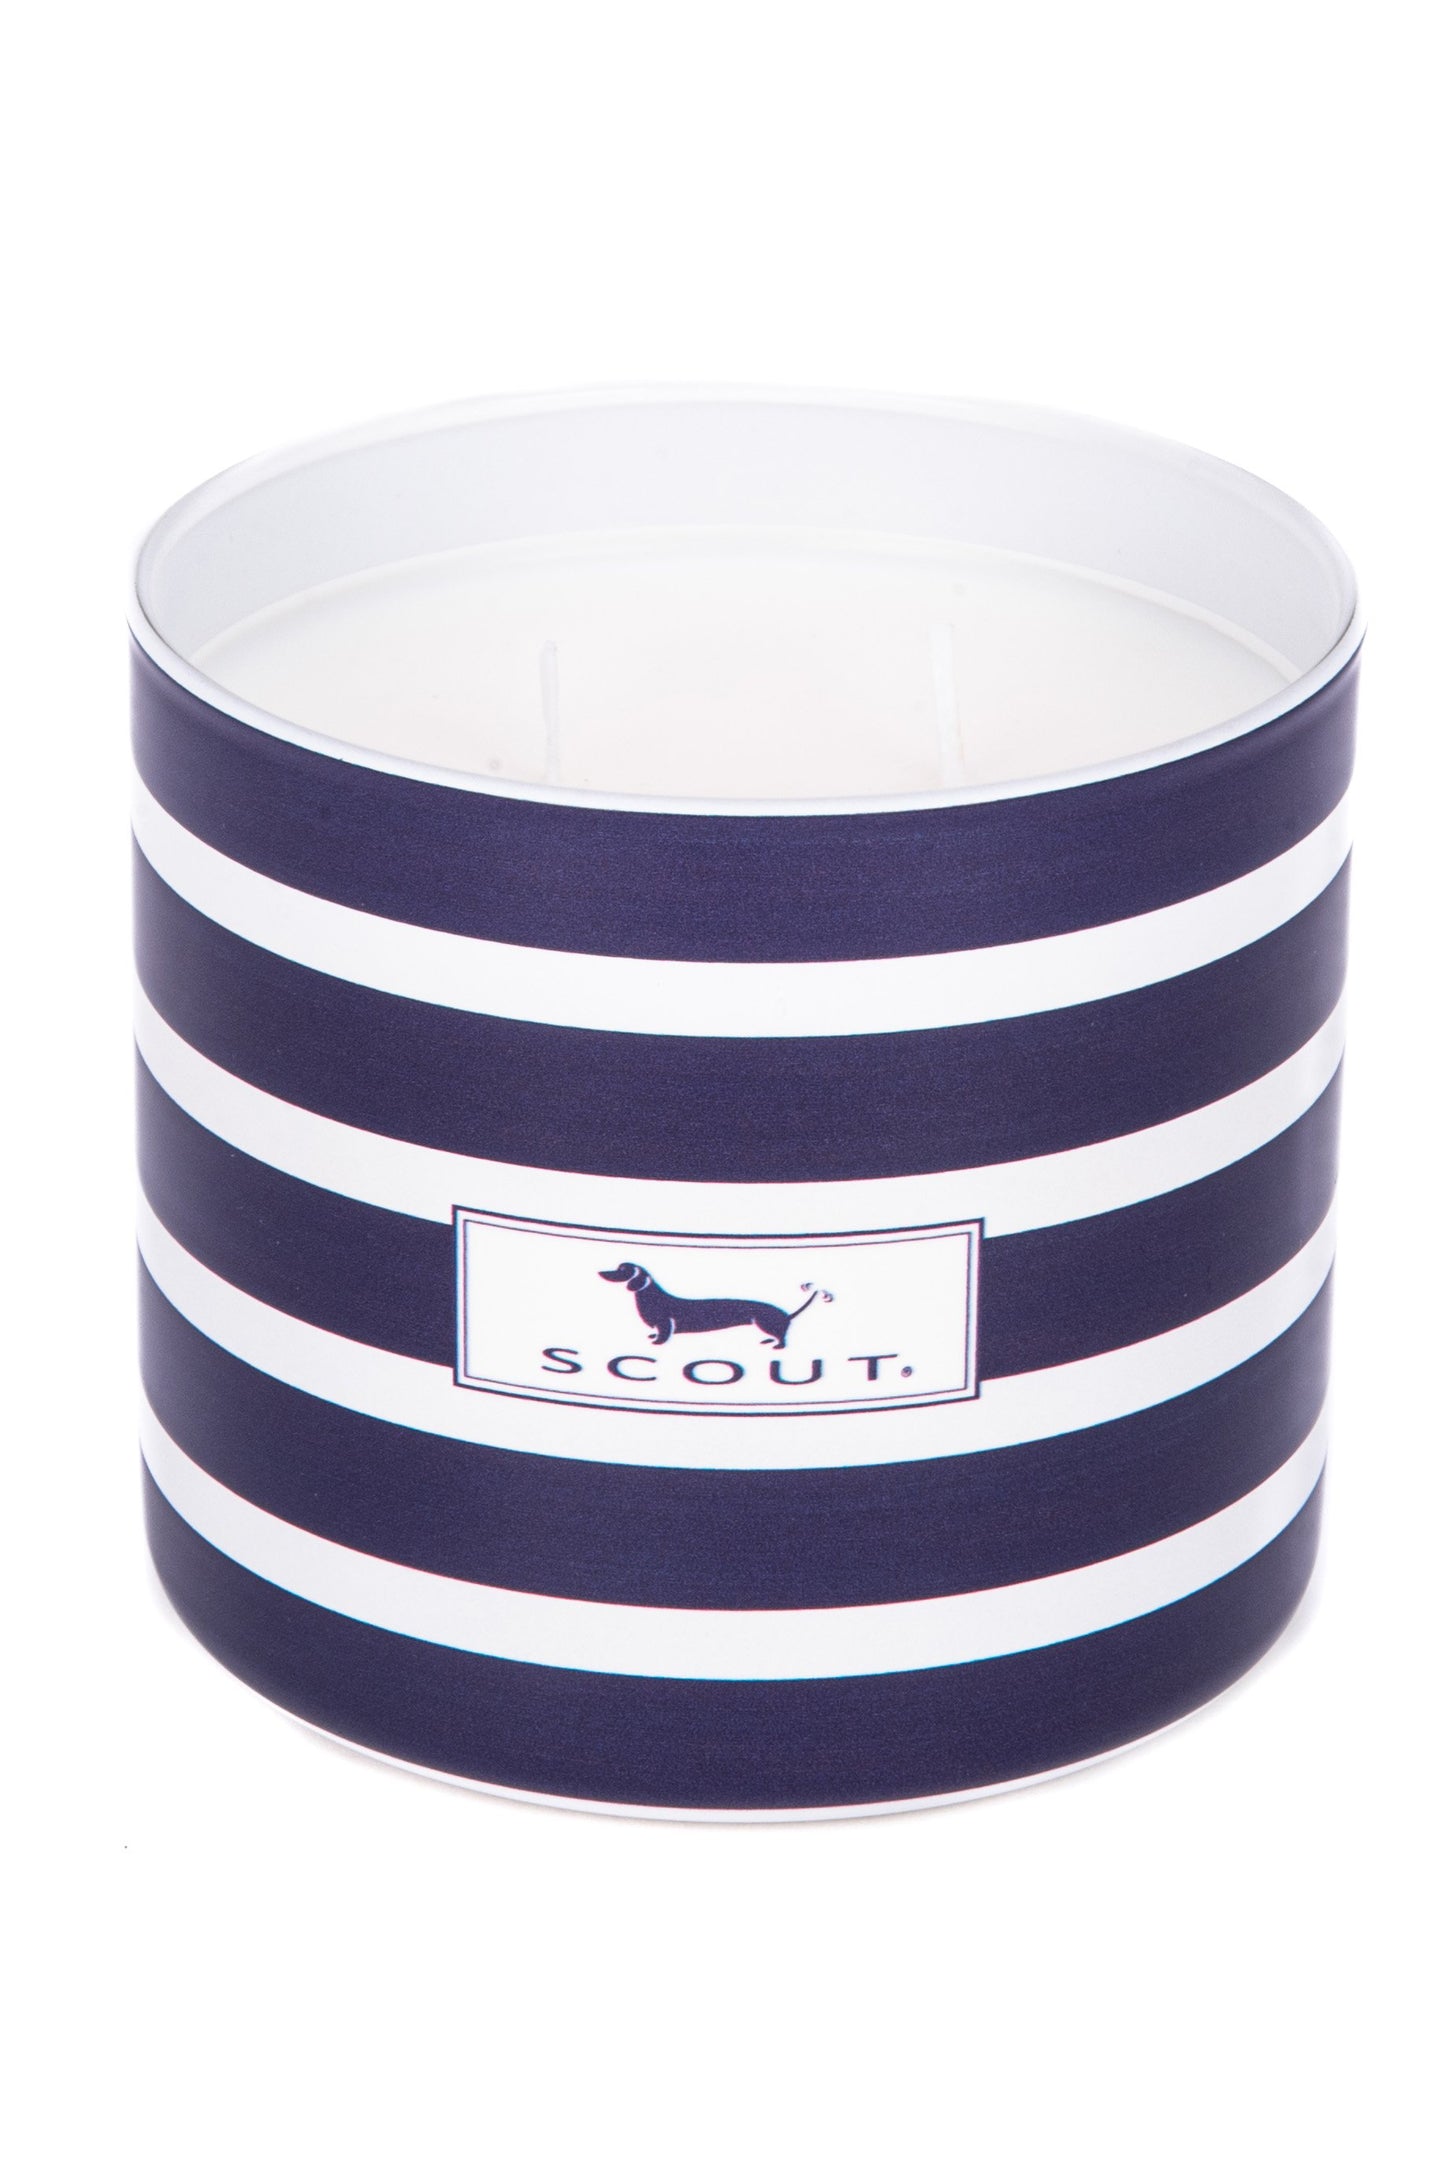 Scout Candle: Nantucket Navy Gifts Annapolis Candle Company   